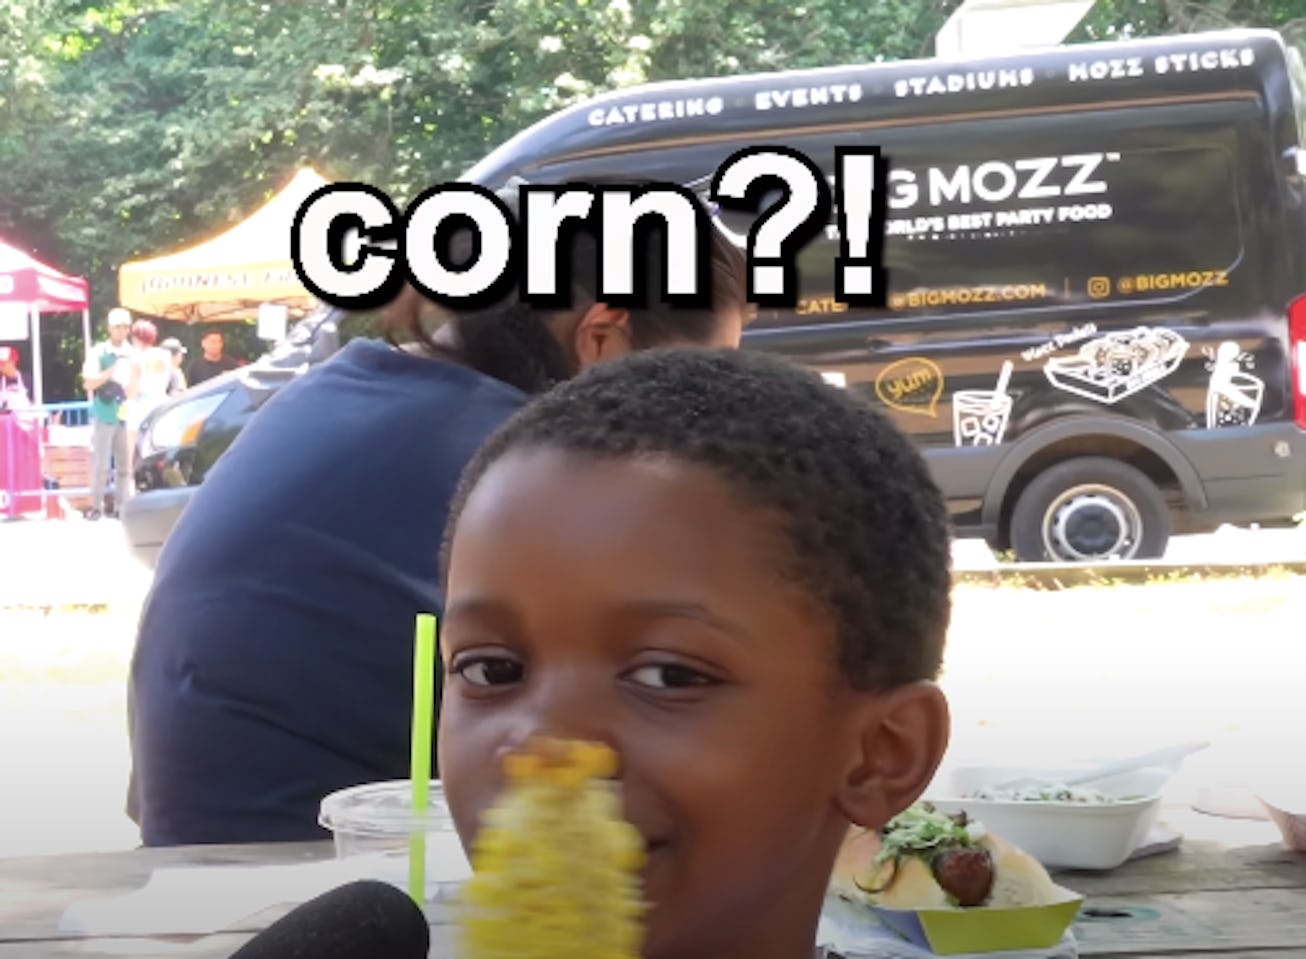 Tariq the "Corn Kid" is now on Cameo, raising ethics questions over internet fame